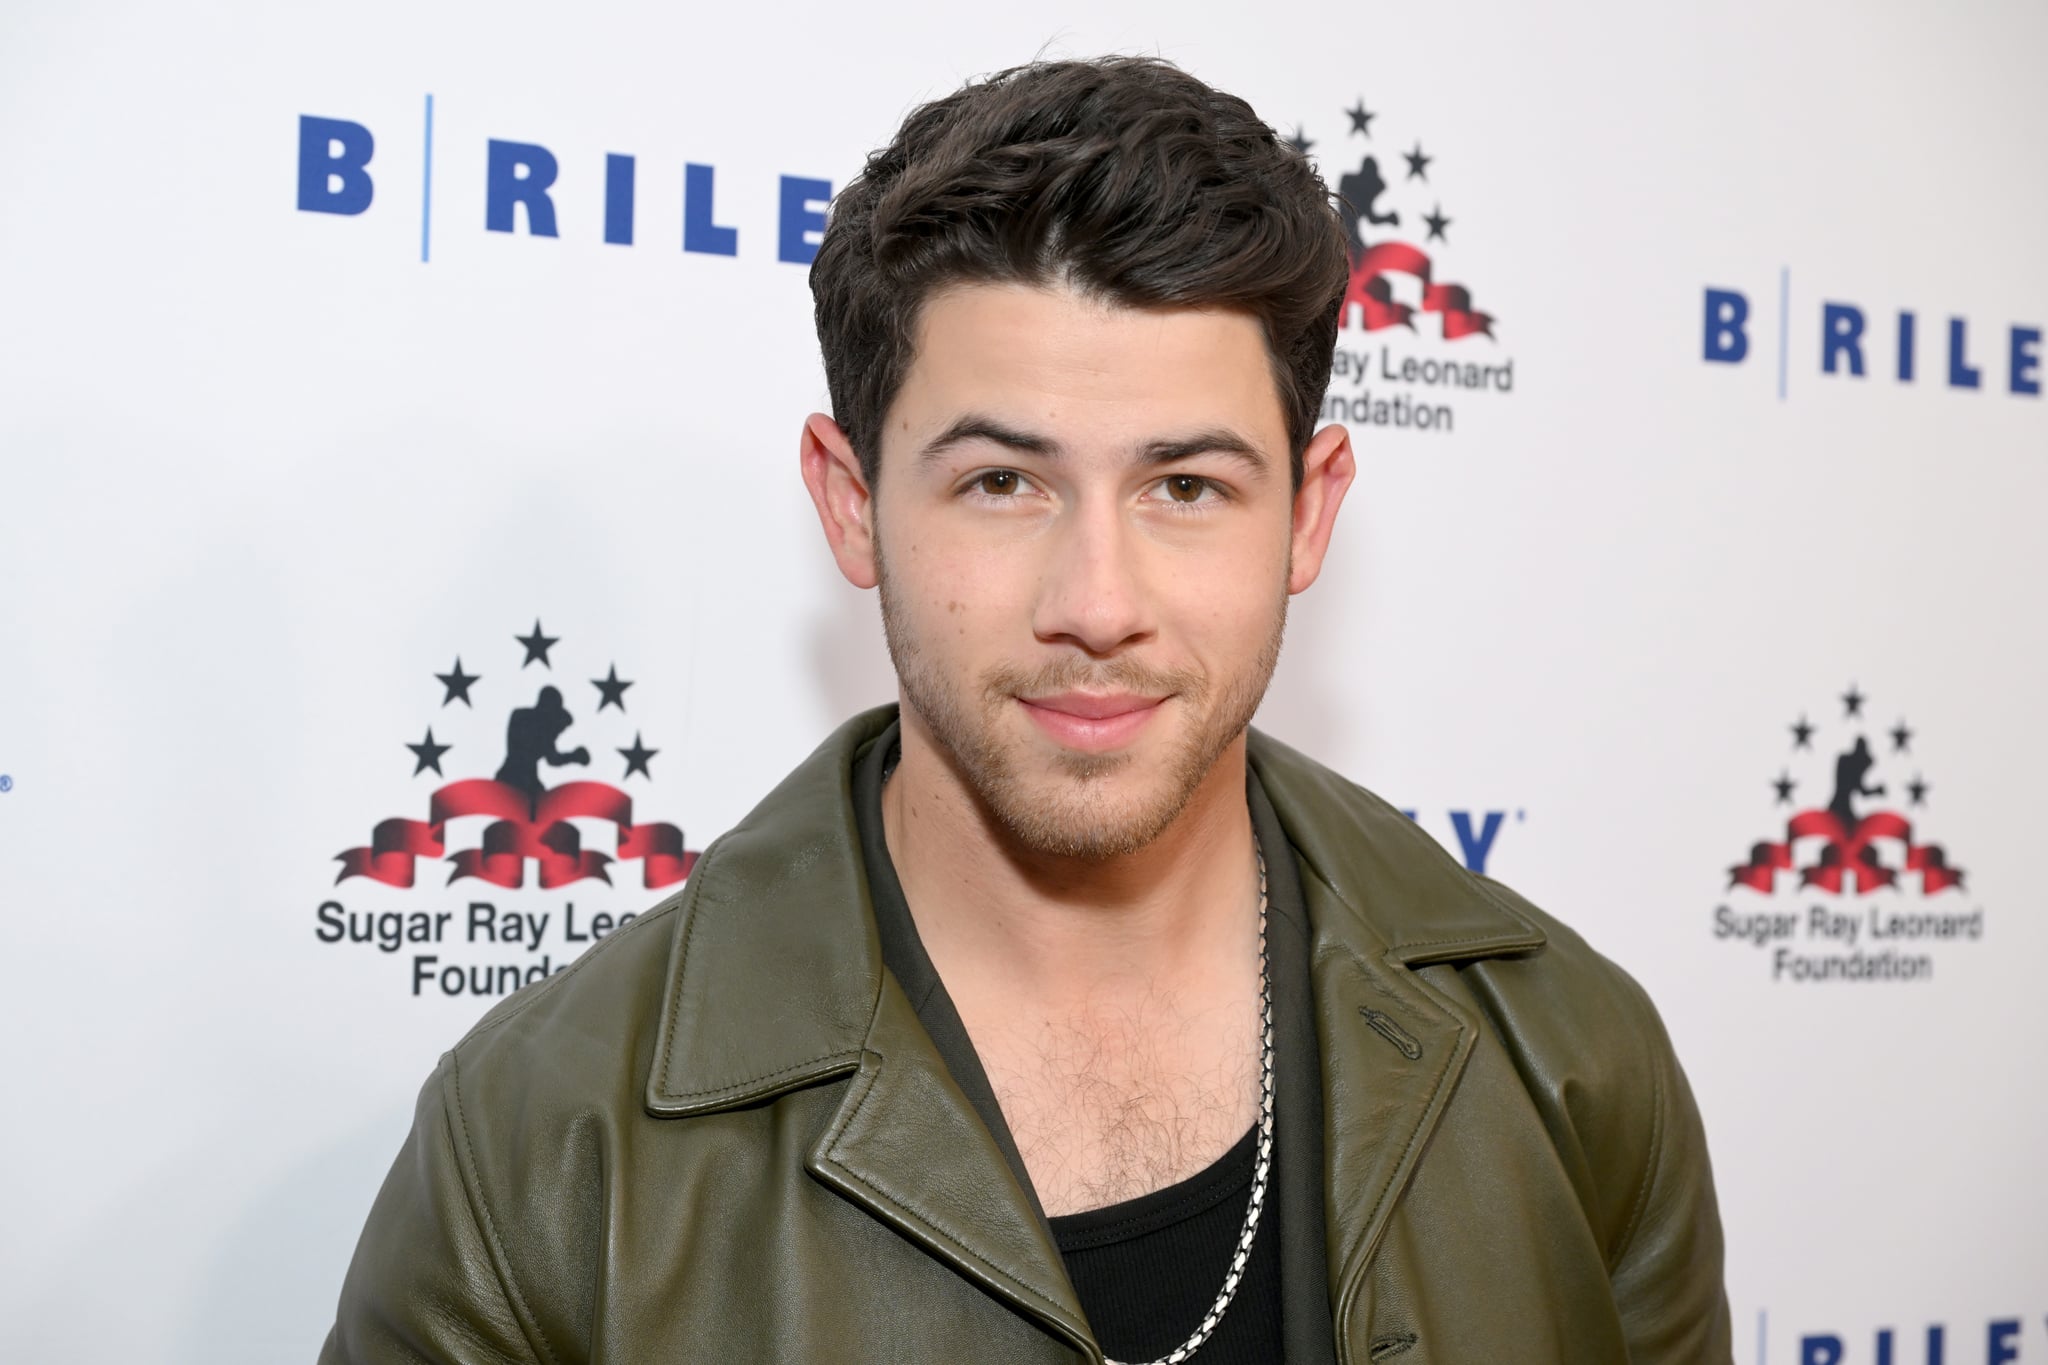 BEVERLY HILLS, CALIFORNIA - MAY 25: Nick Jonas attends Sugar Ray Leonard Foundation's 11th Annual 'Big Fighters, Big Cause' Charity Boxing Night presented by B. Riley Securities at The Beverly Hilton on May 25, 2022 in Beverly Hills, California. (Photo by Michael Kovac/Getty Images for Sugar Ray Leonard Foundation)